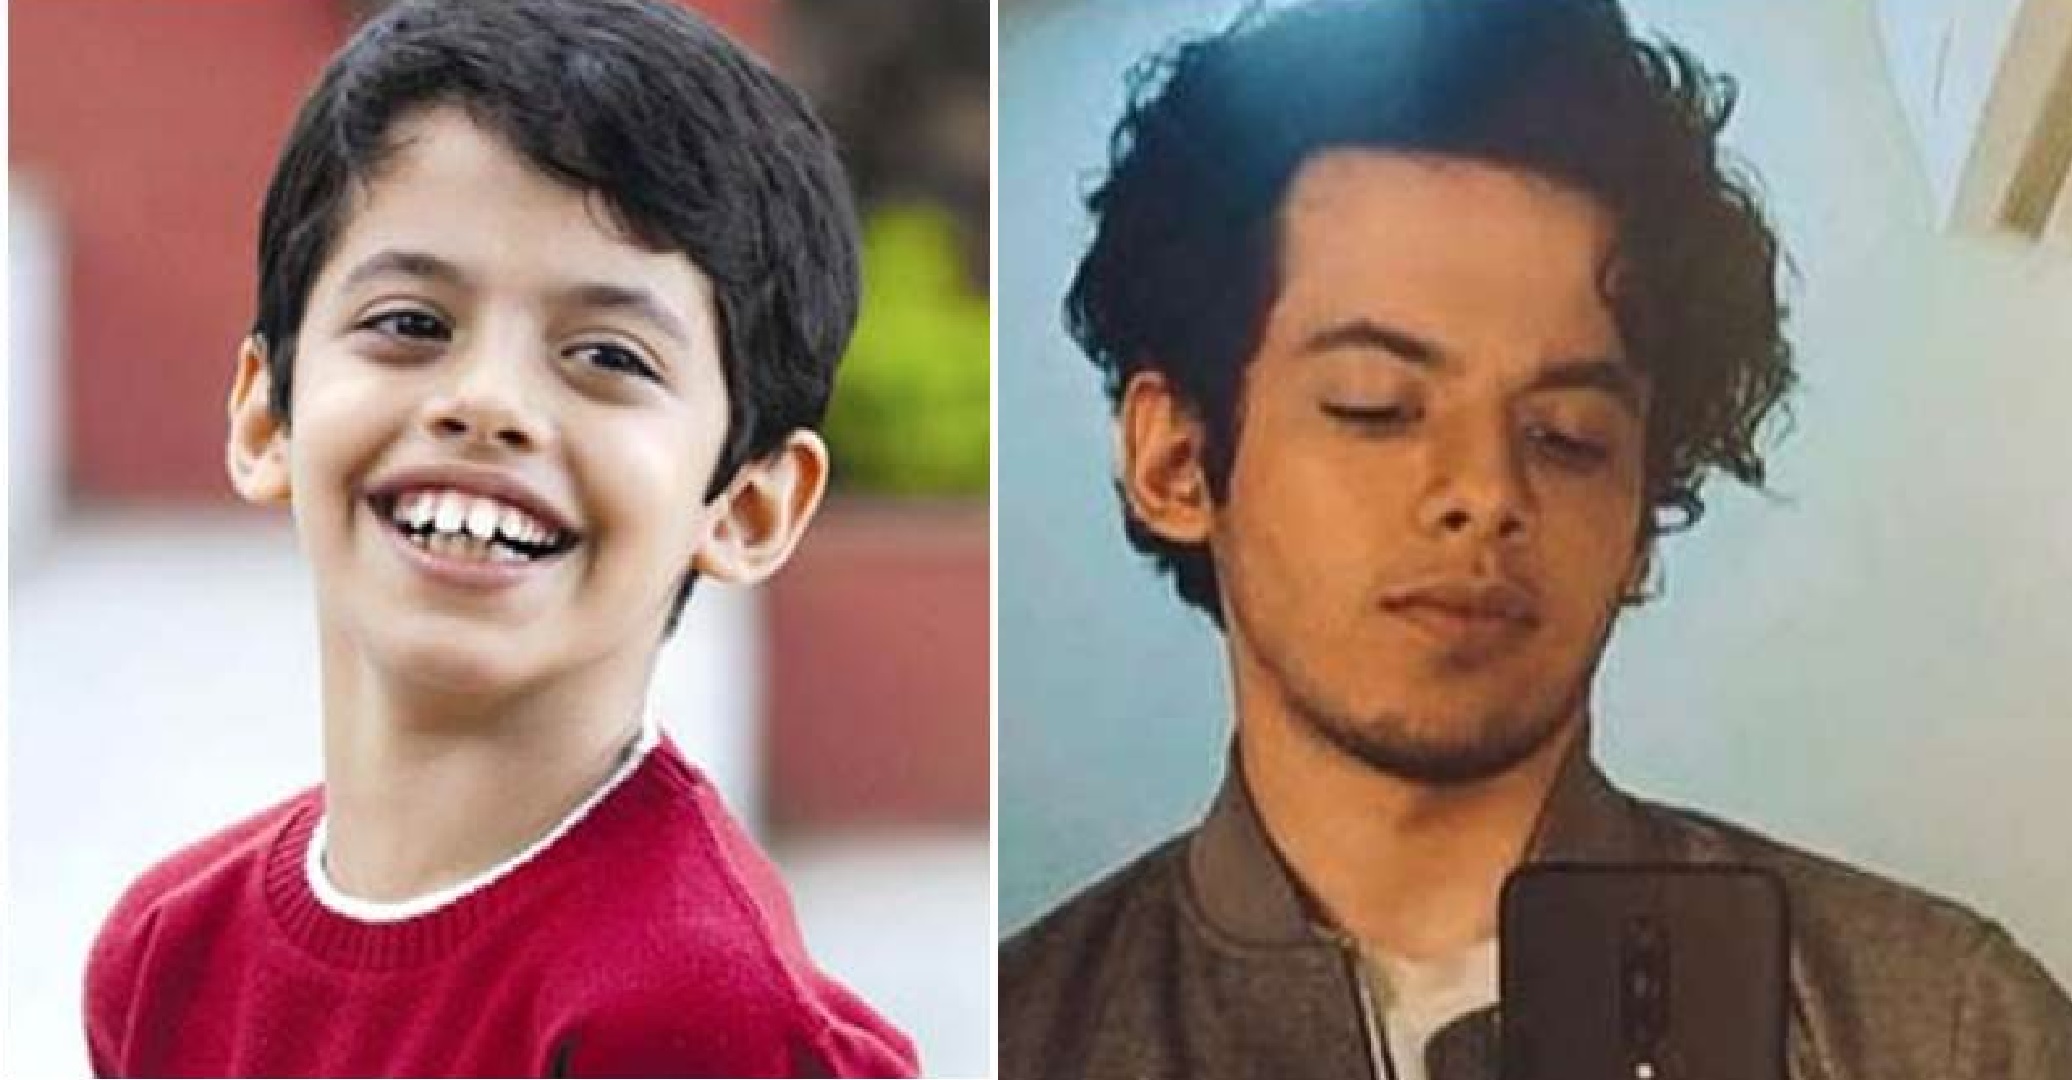 The Adorable Kid From Taare Zameen Par, Darsheel Safari Is Now 25 And Wants To Work With Sara & Janhvi